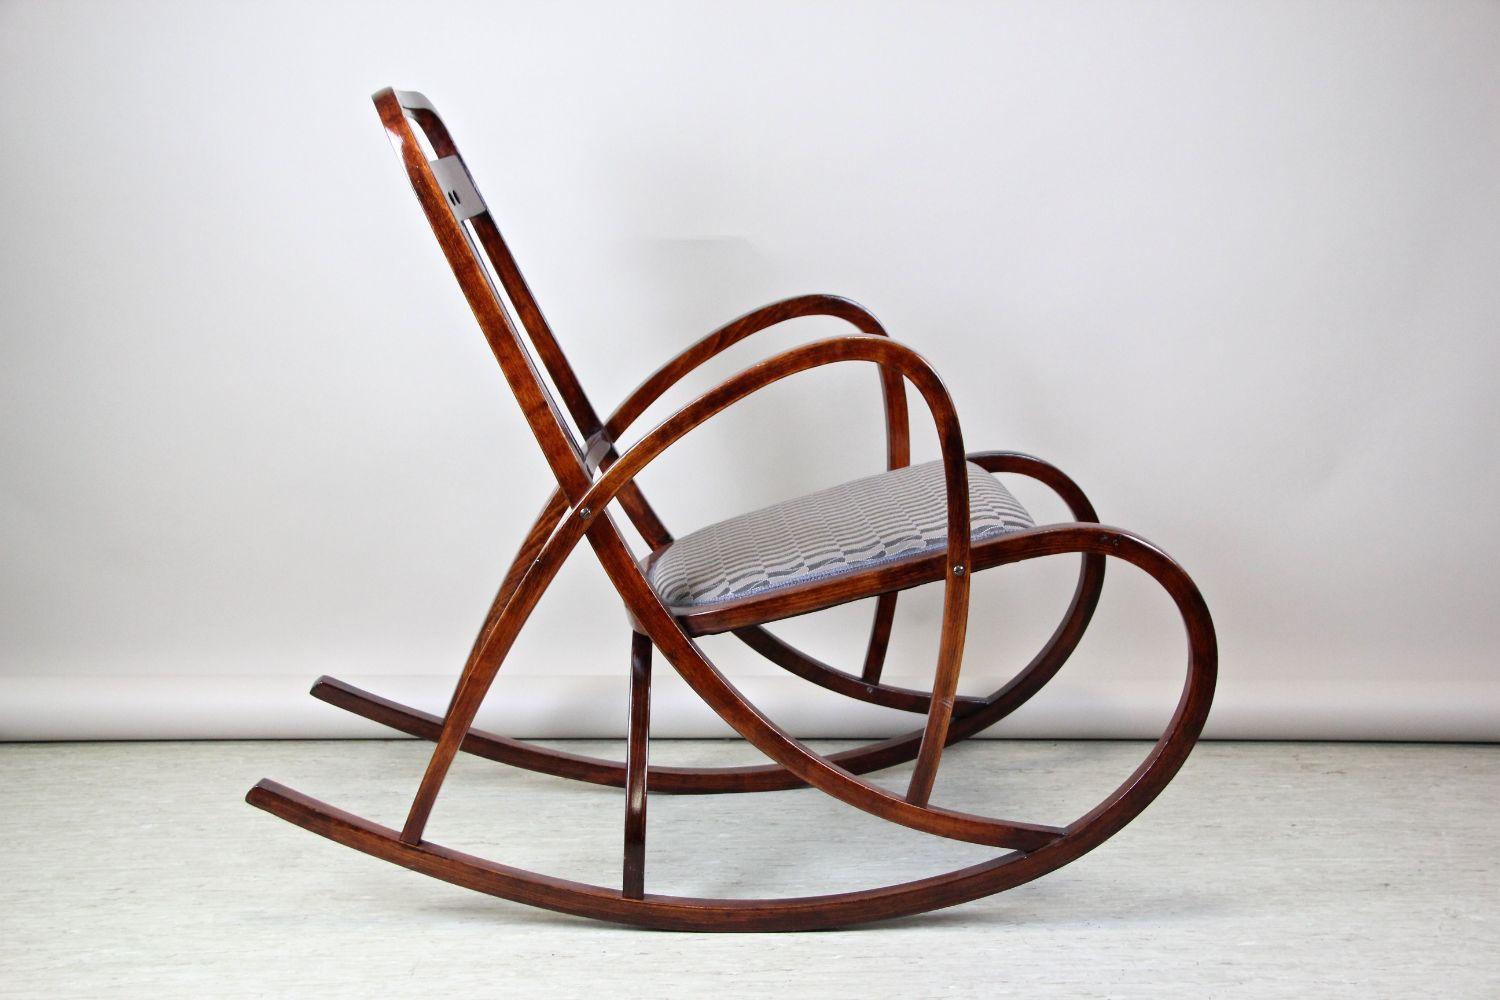 Stained Rocking Chair No. 511 by M. Kammerer for Thonet, Austria, circa 1905